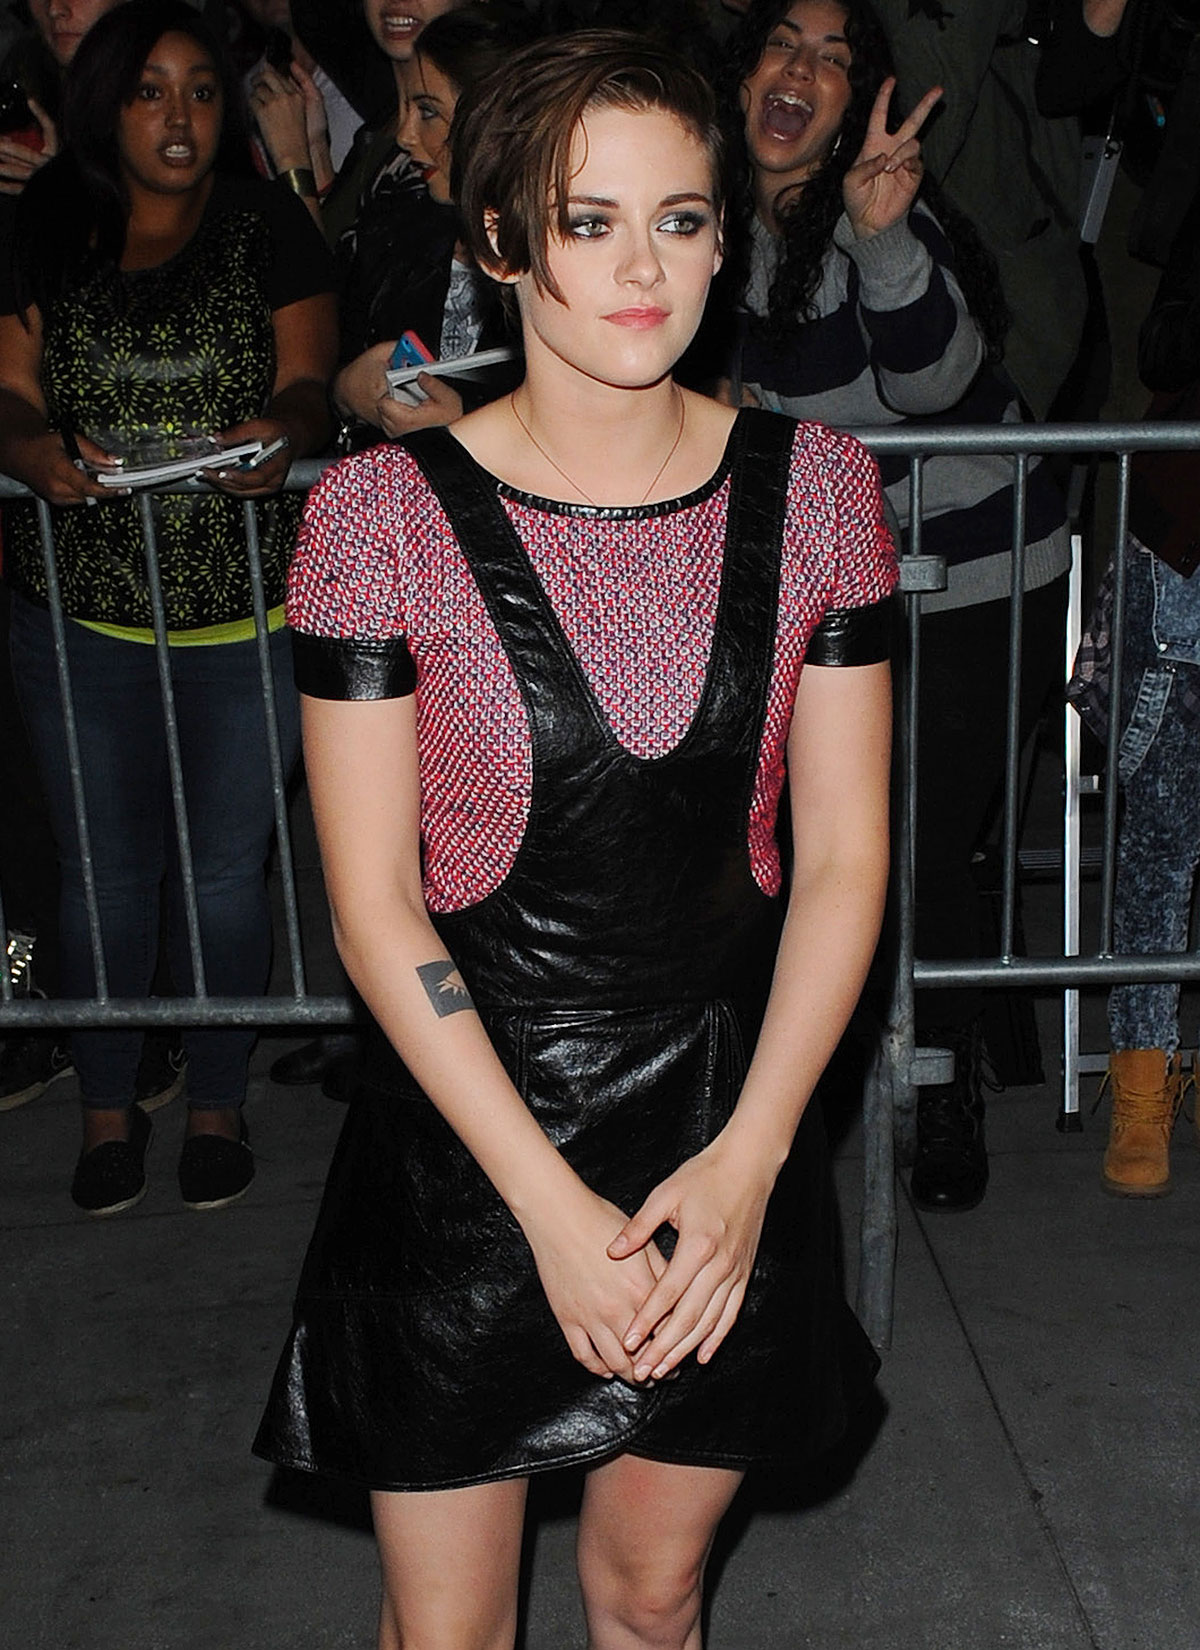 Kristen Stewart appearance at The Apple Store in New York